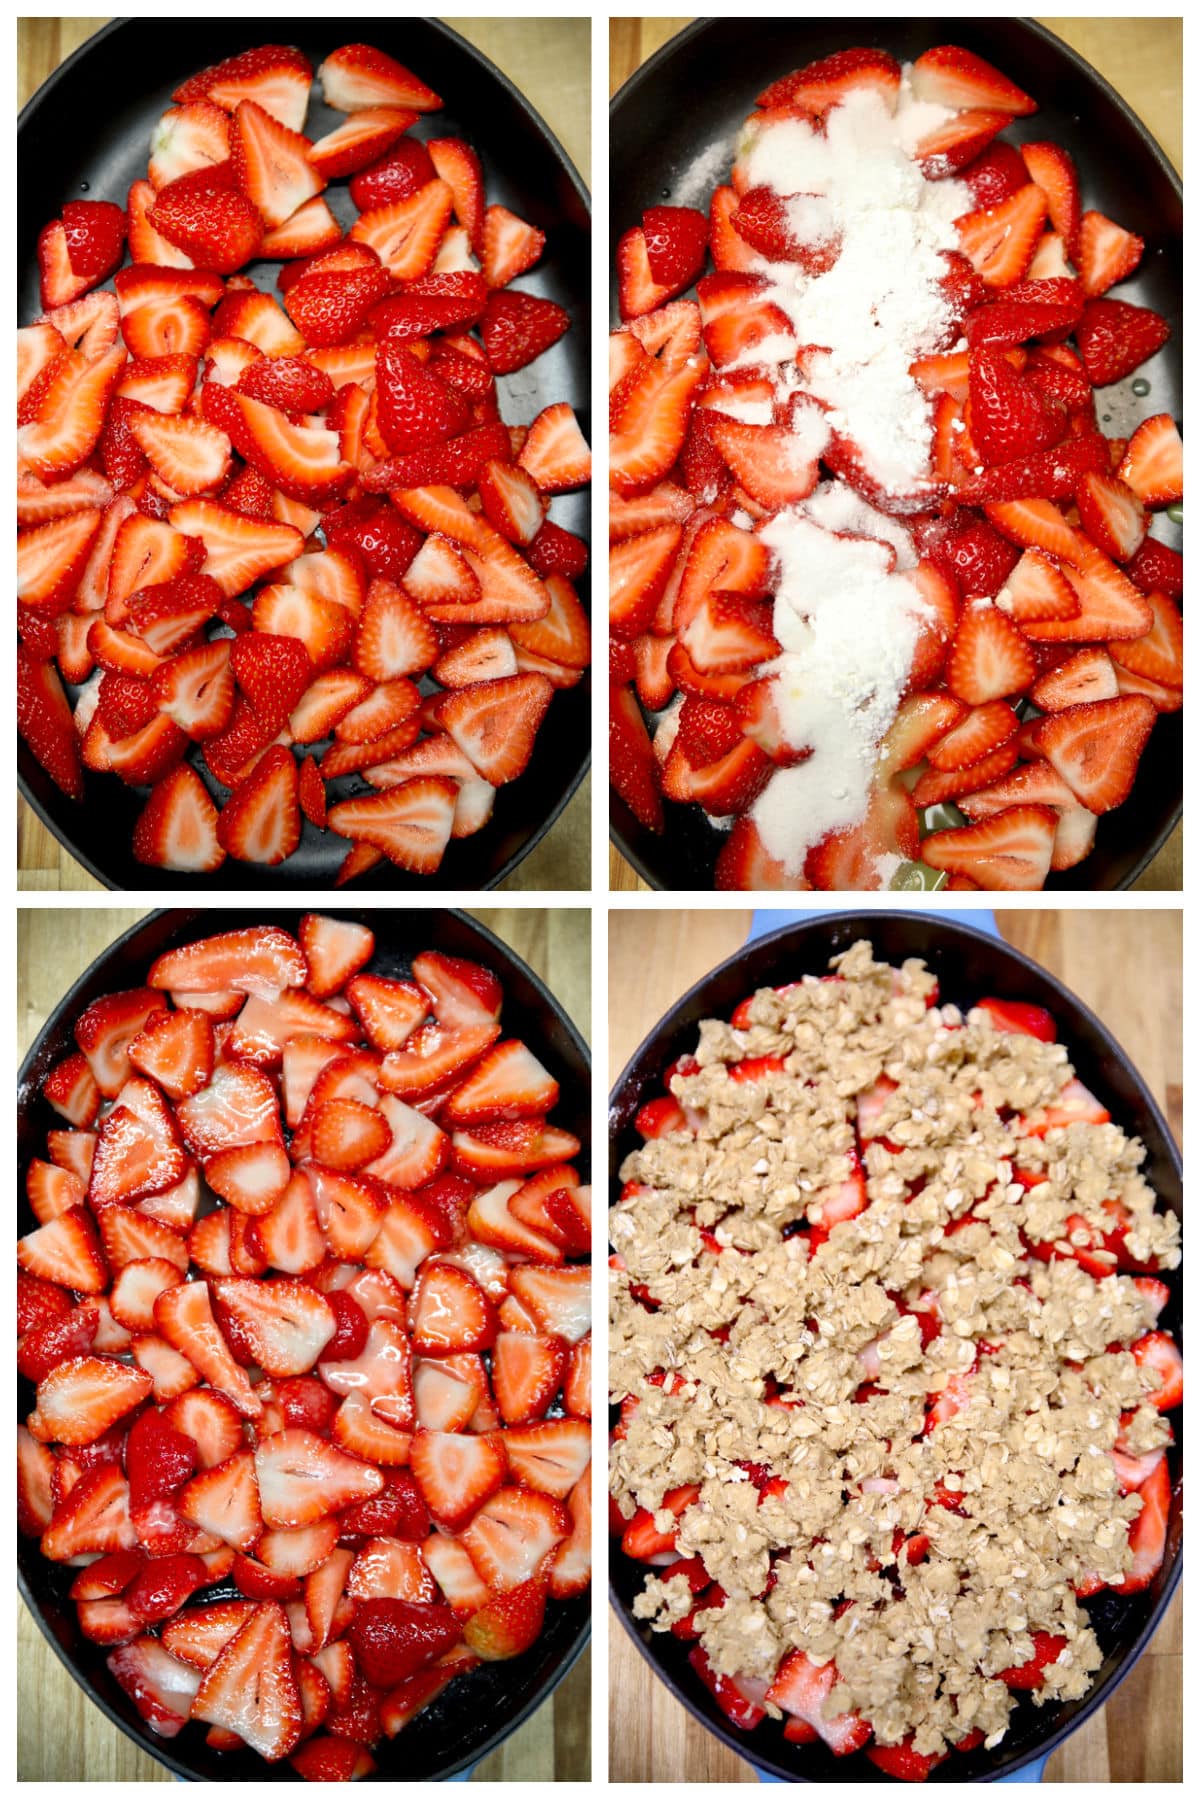 Collage making strawberry crisp in an oval dish.